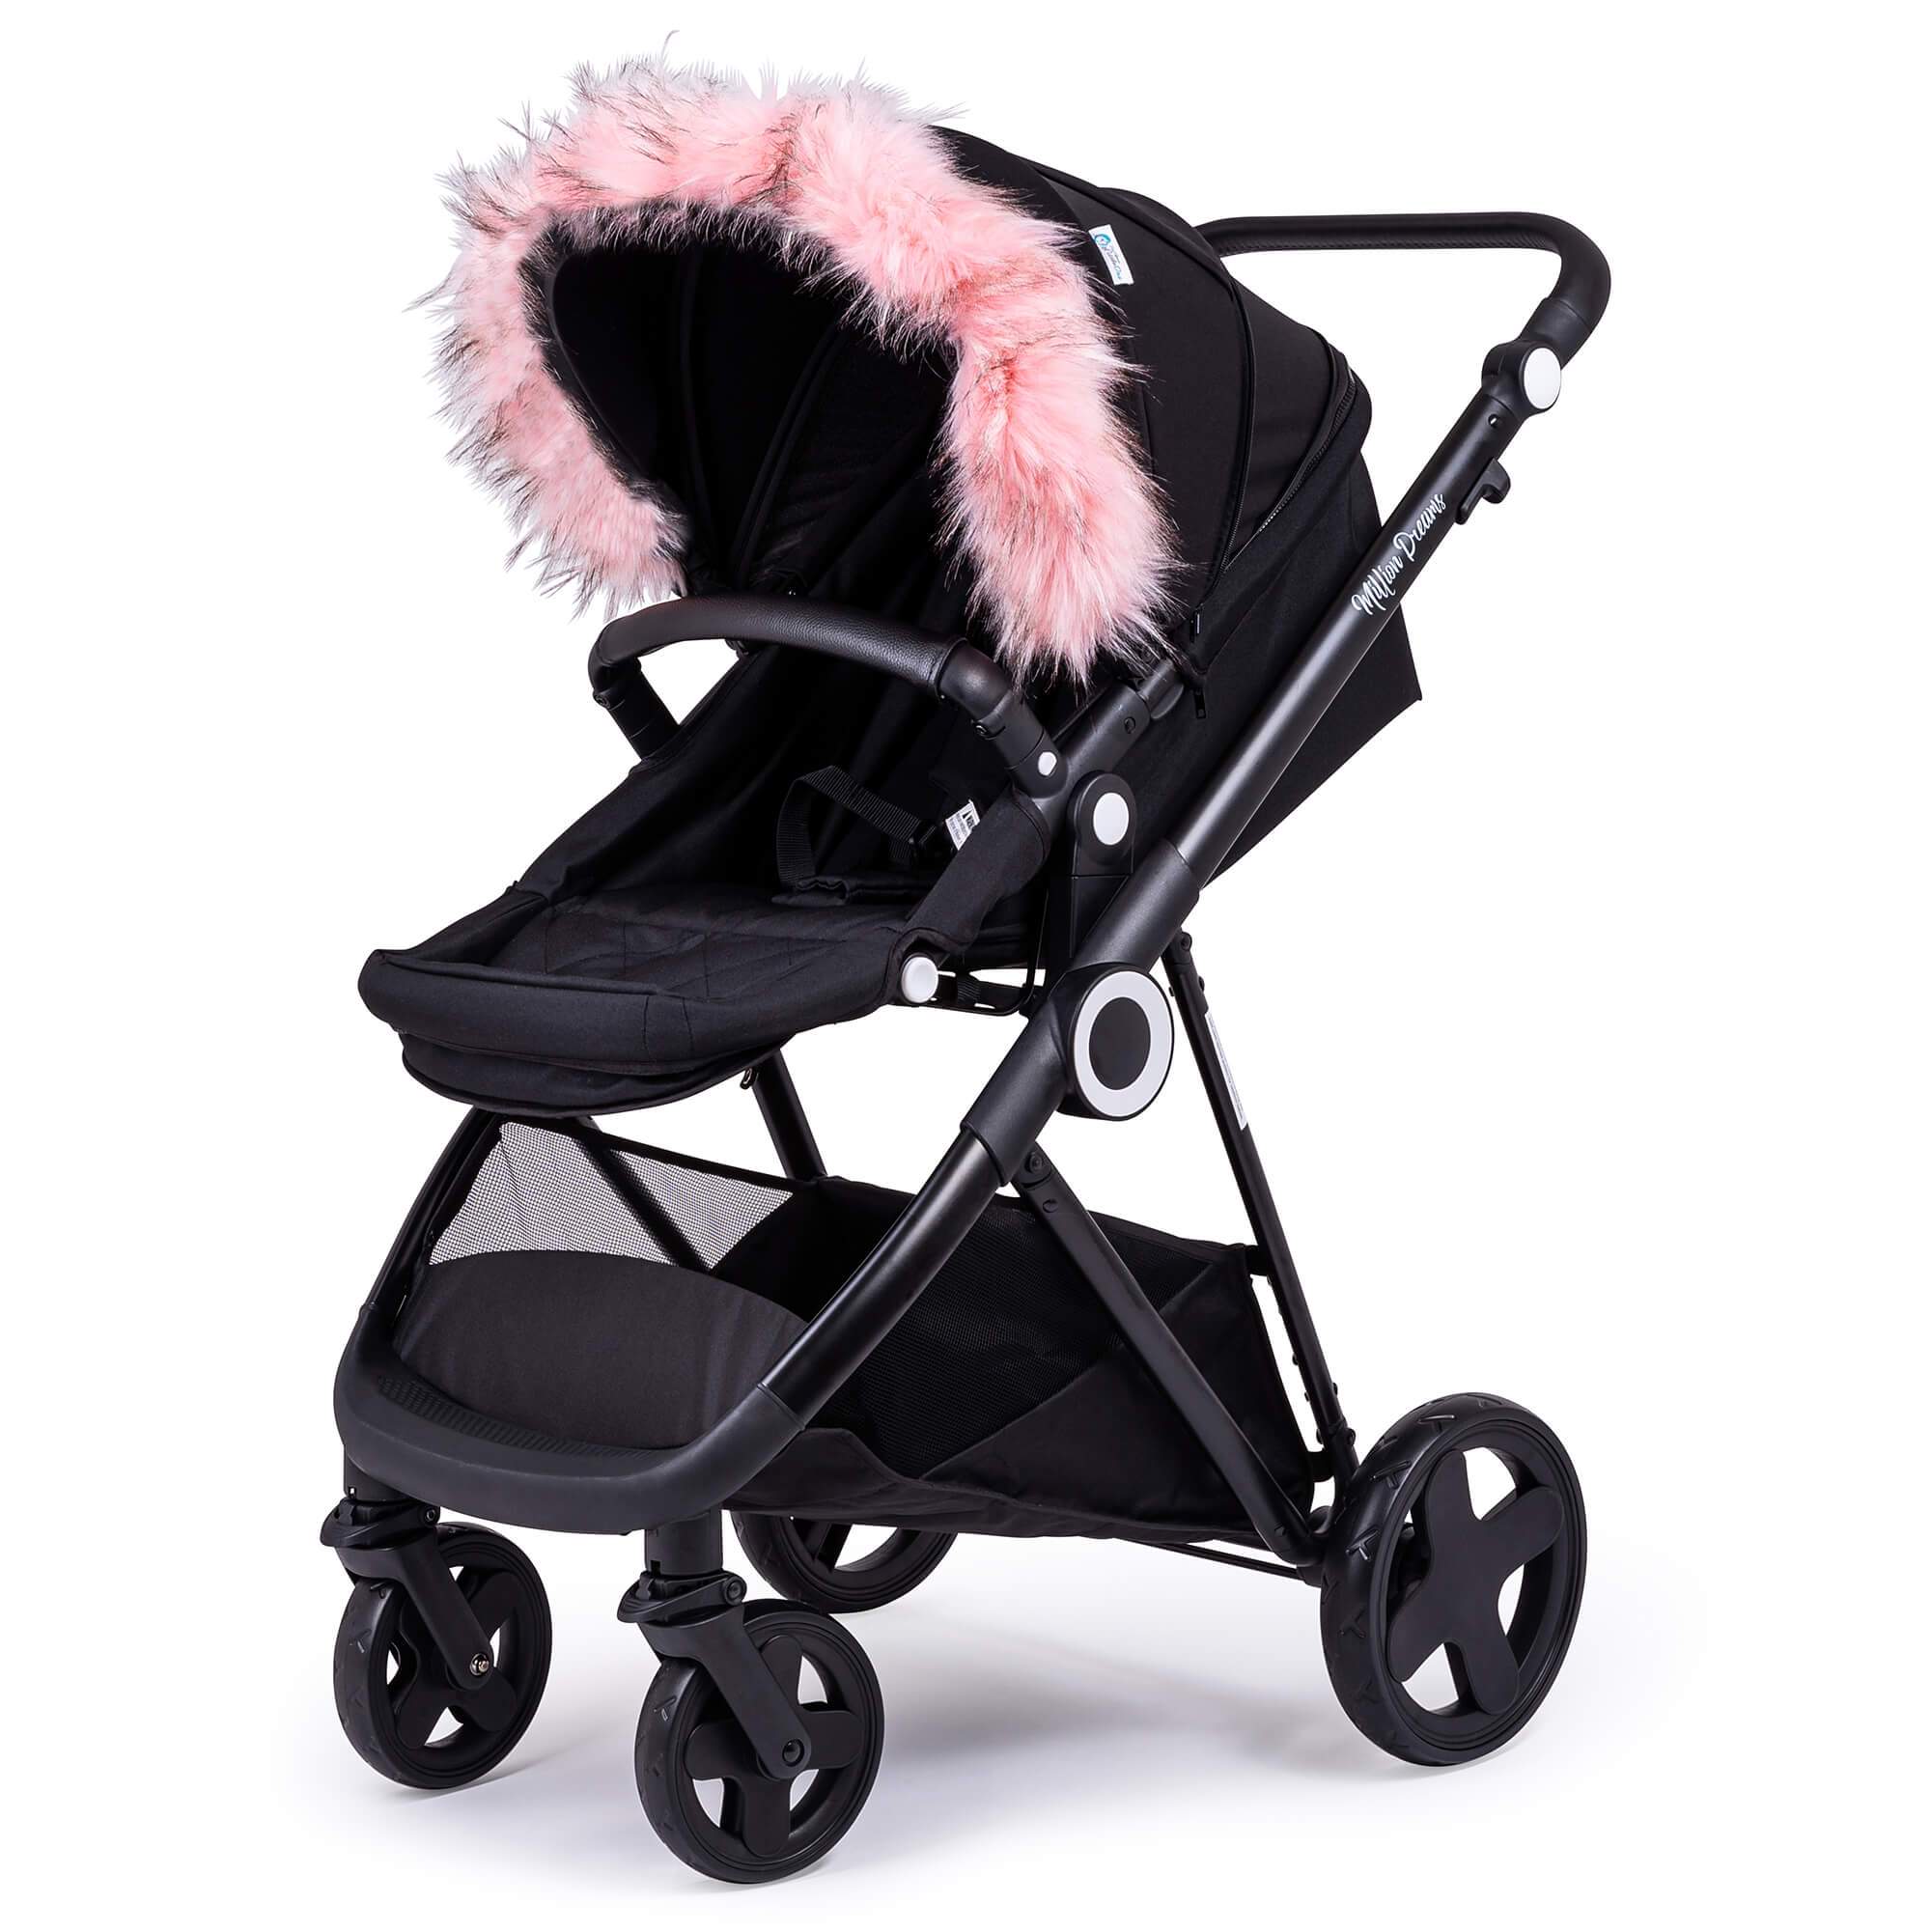 Pram Fur Hood Trim Attachment for Pushchair Compatible with Emmaljunga - Light Pink / Fits All Models | For Your Little One